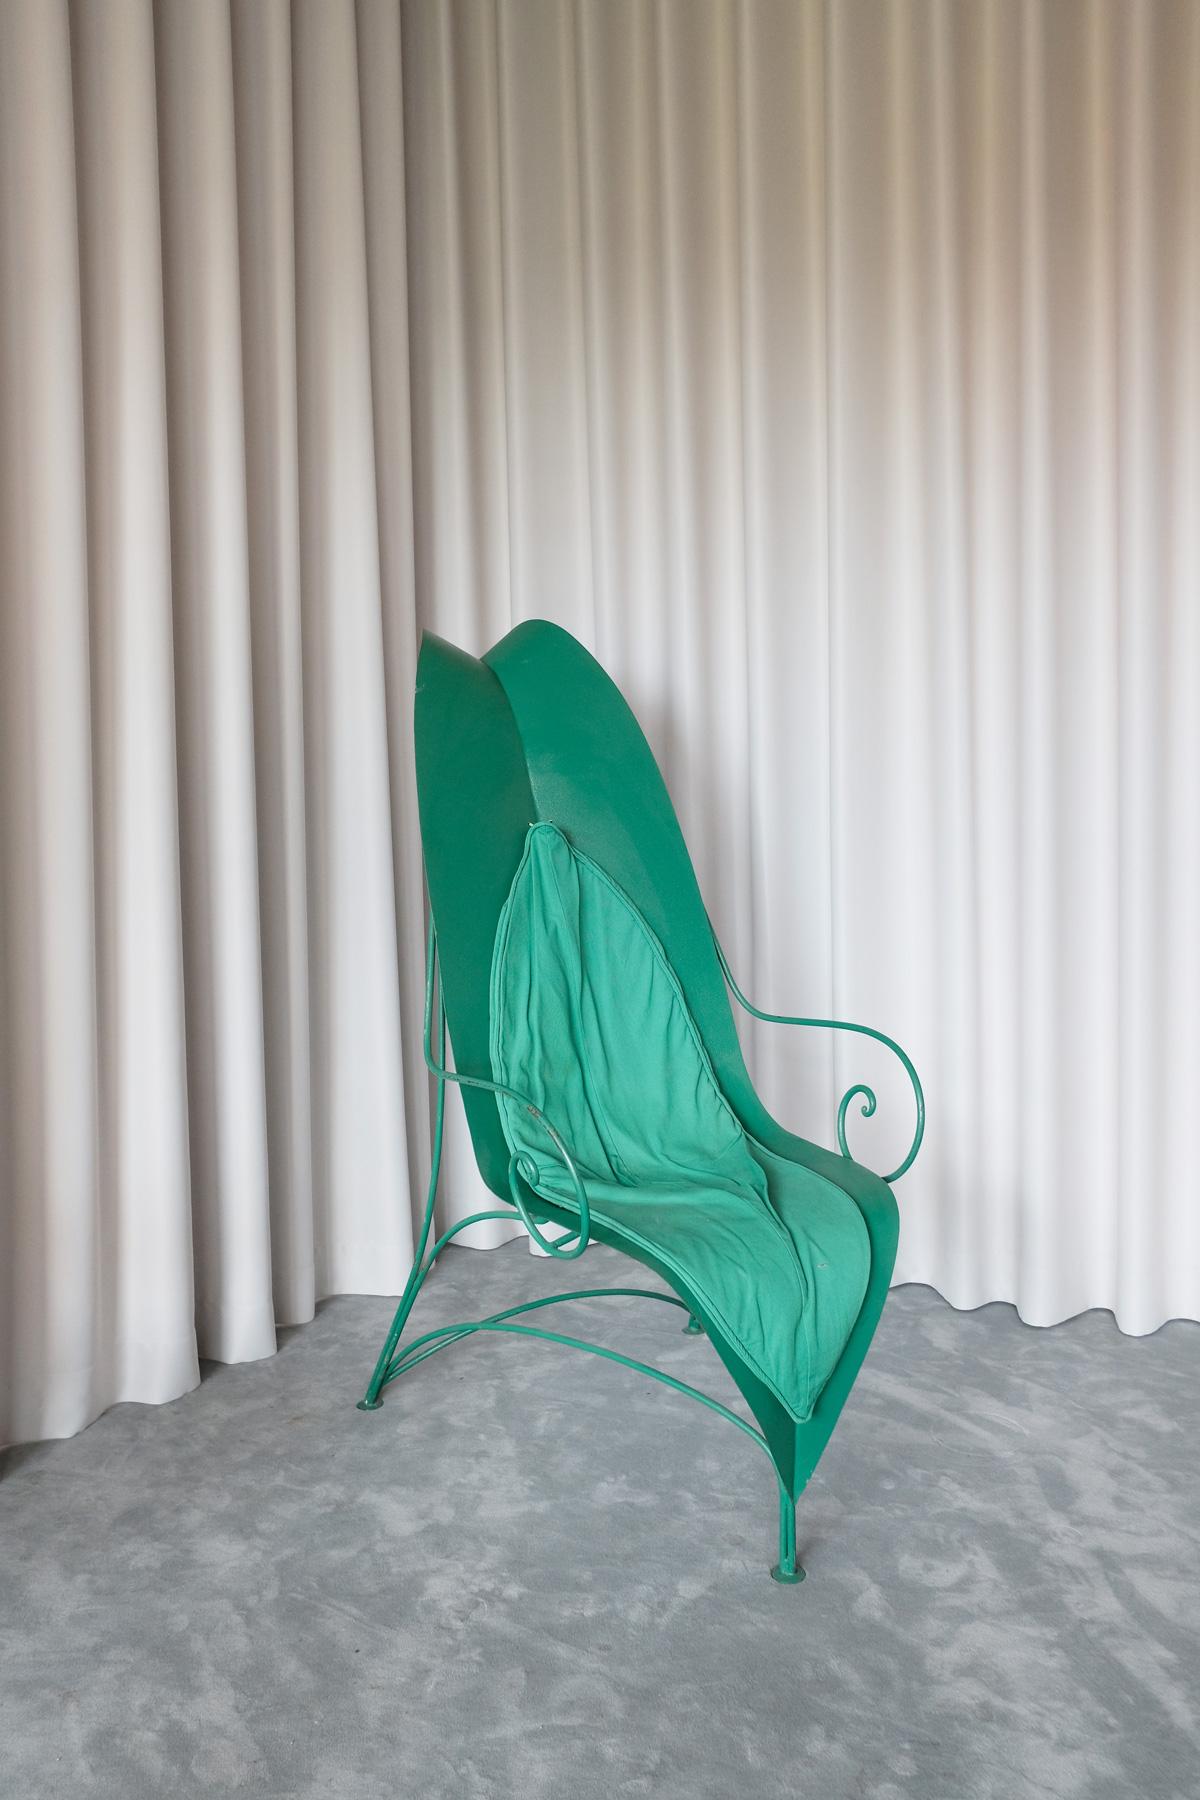 This armchair was designed by Fabrizio Corneli for Mirabili in 1989 and was entirely crafted by master artisans using iron. The striking seat and back are one piece that is shaped and colored to resemble a gigantic leaf in vivid green. The base